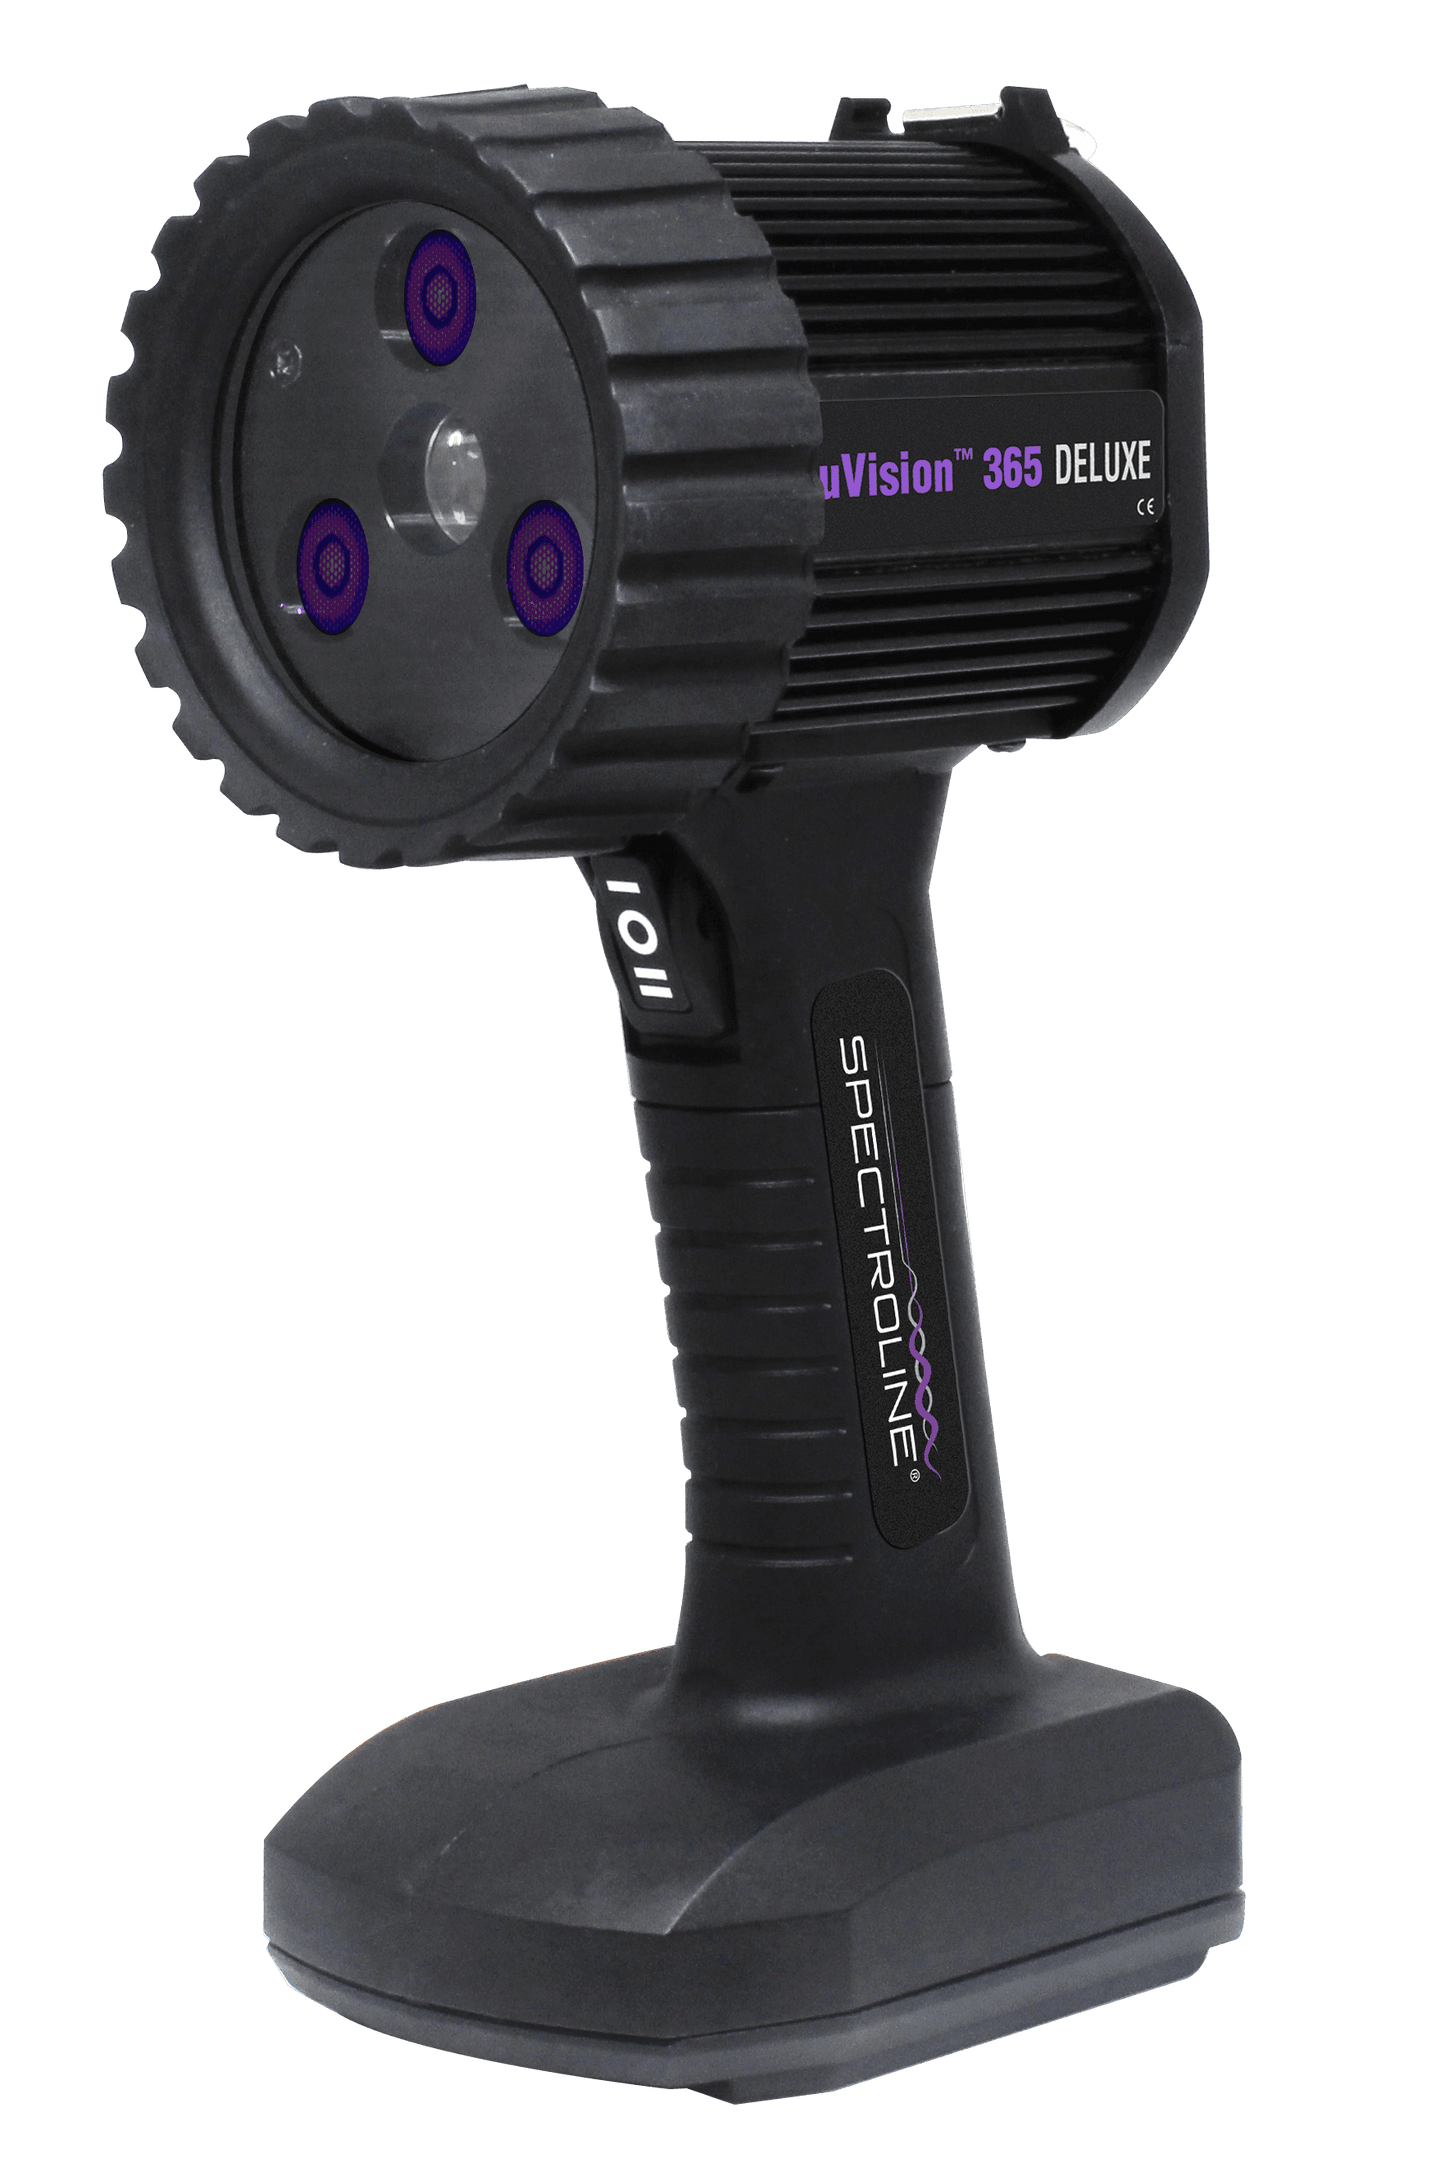 uVision 365 LED 365nm Ultraviolet UV-A Blacklight Lamp Kit with in handle Li-Ion Battery Also available in foreign voltages